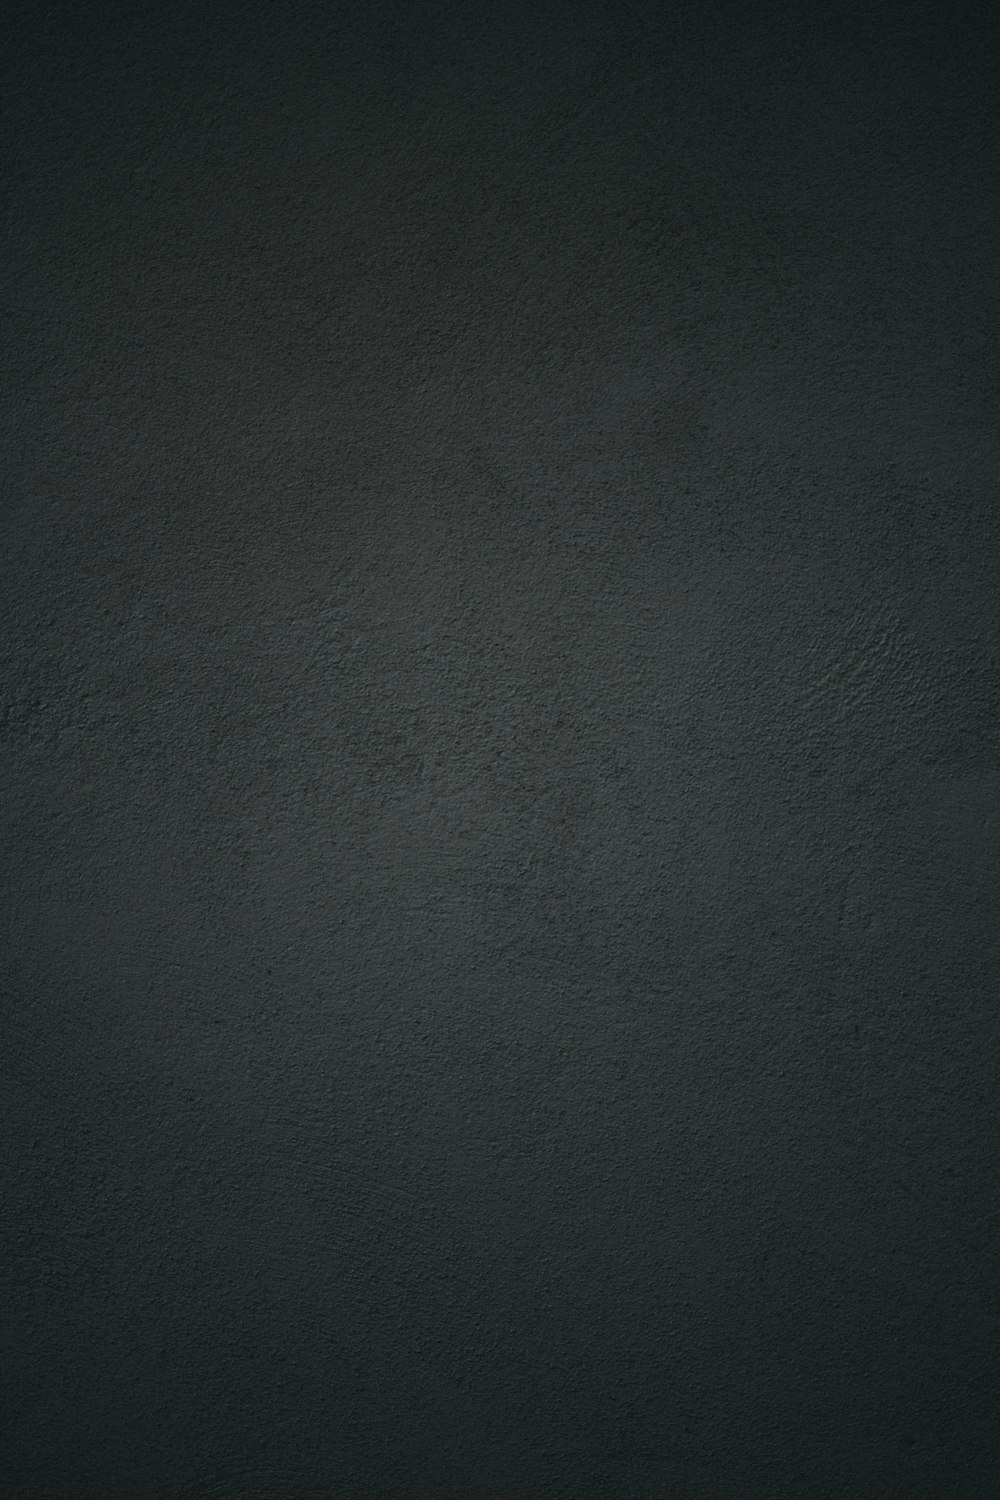 1500+ Wall Texture Pictures  Download Free Images on Unsplash